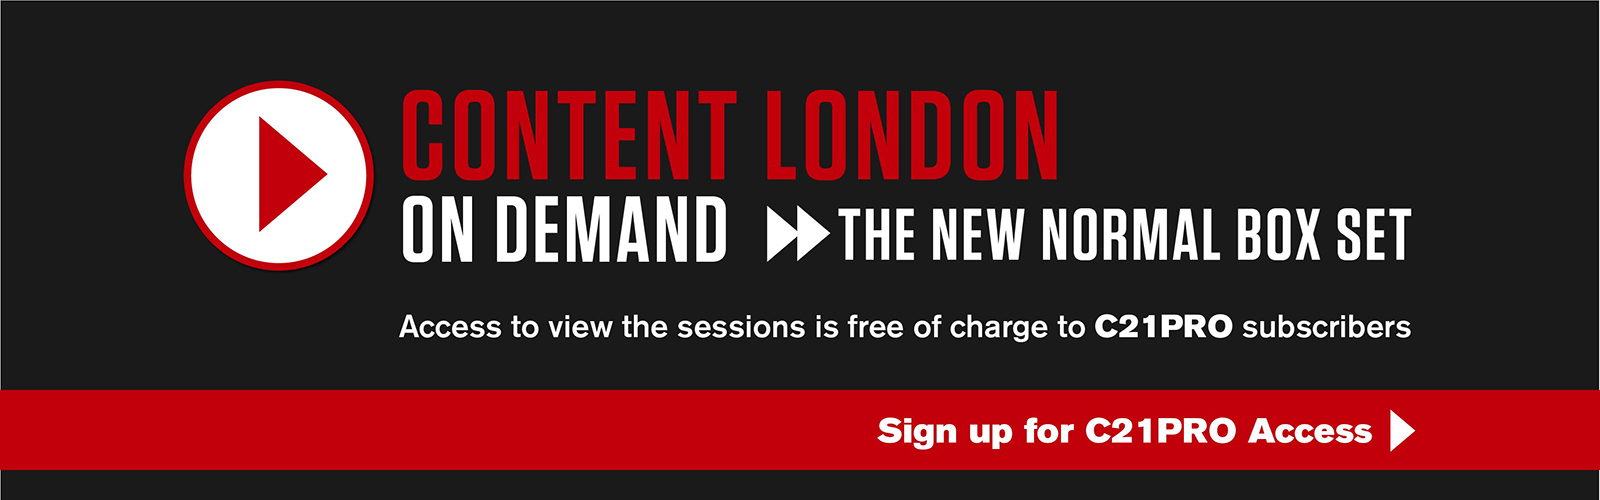 Content London On Demand